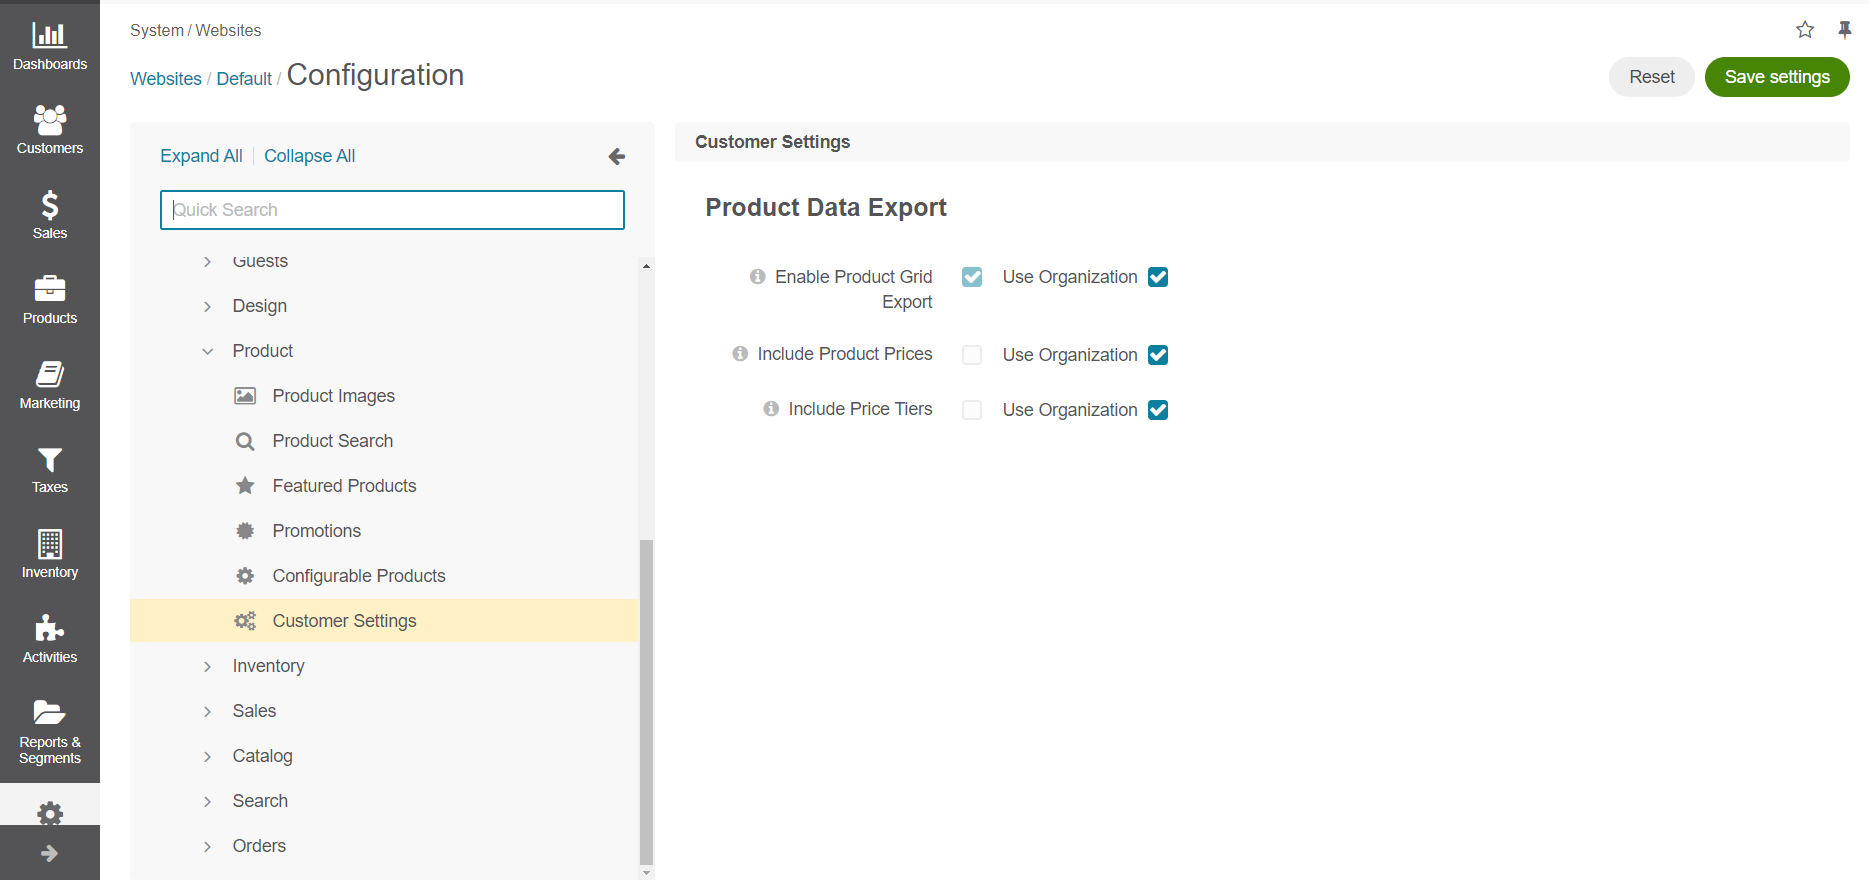 Product data export configuration options on website level